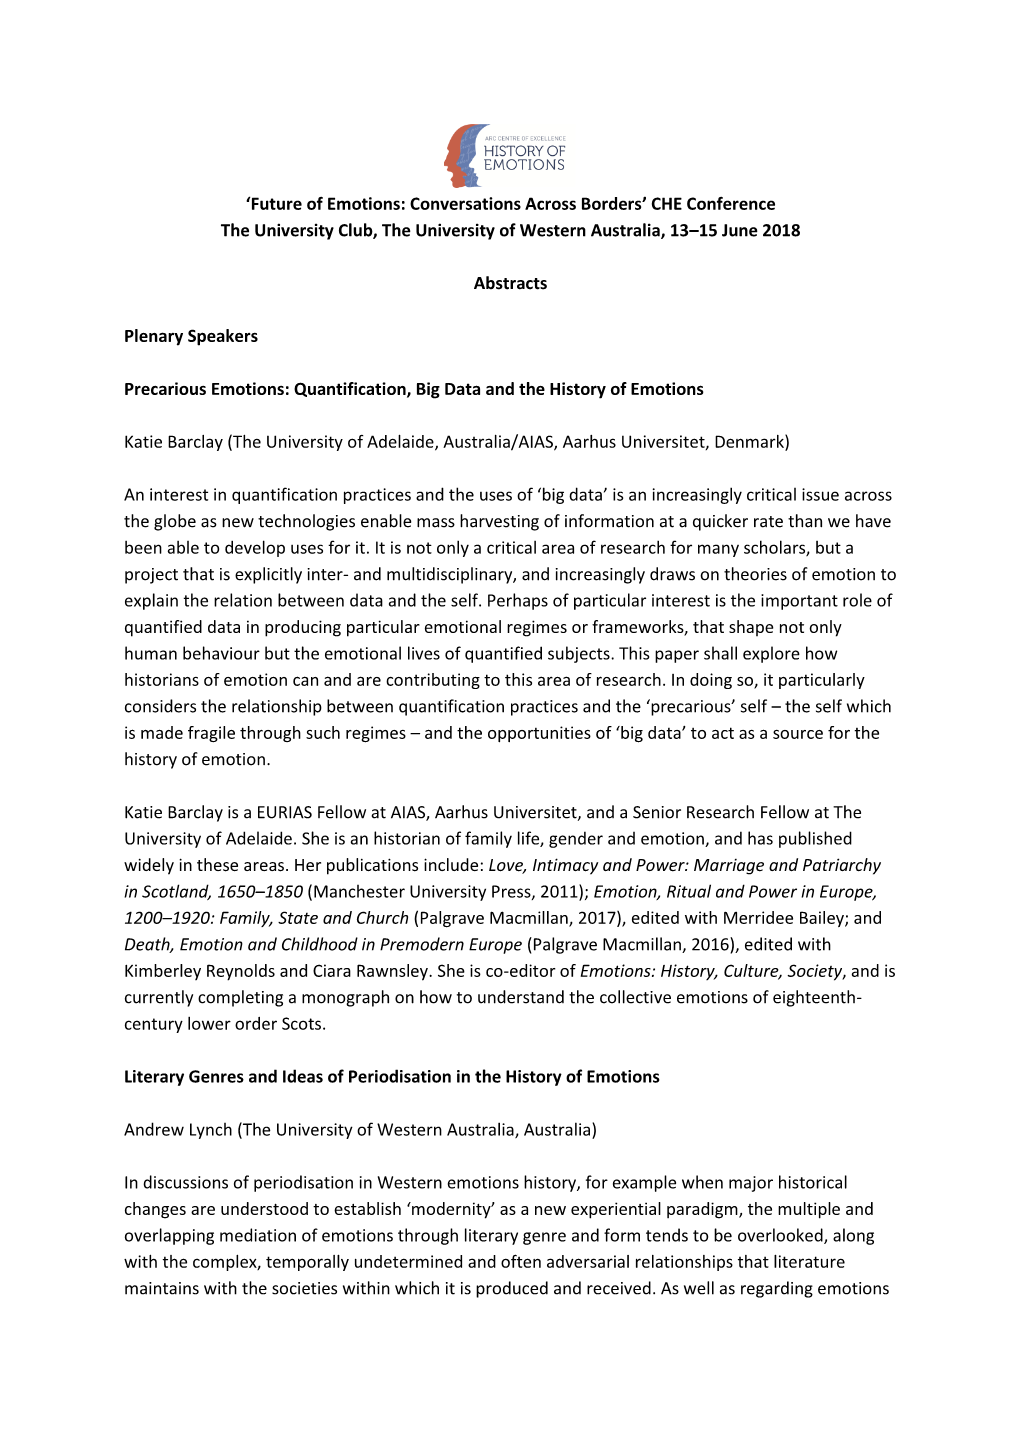 Future of Emotions: Conversations Across Borders’ CHE Conference the University Club, the University of Western Australia, 13–15 June 2018